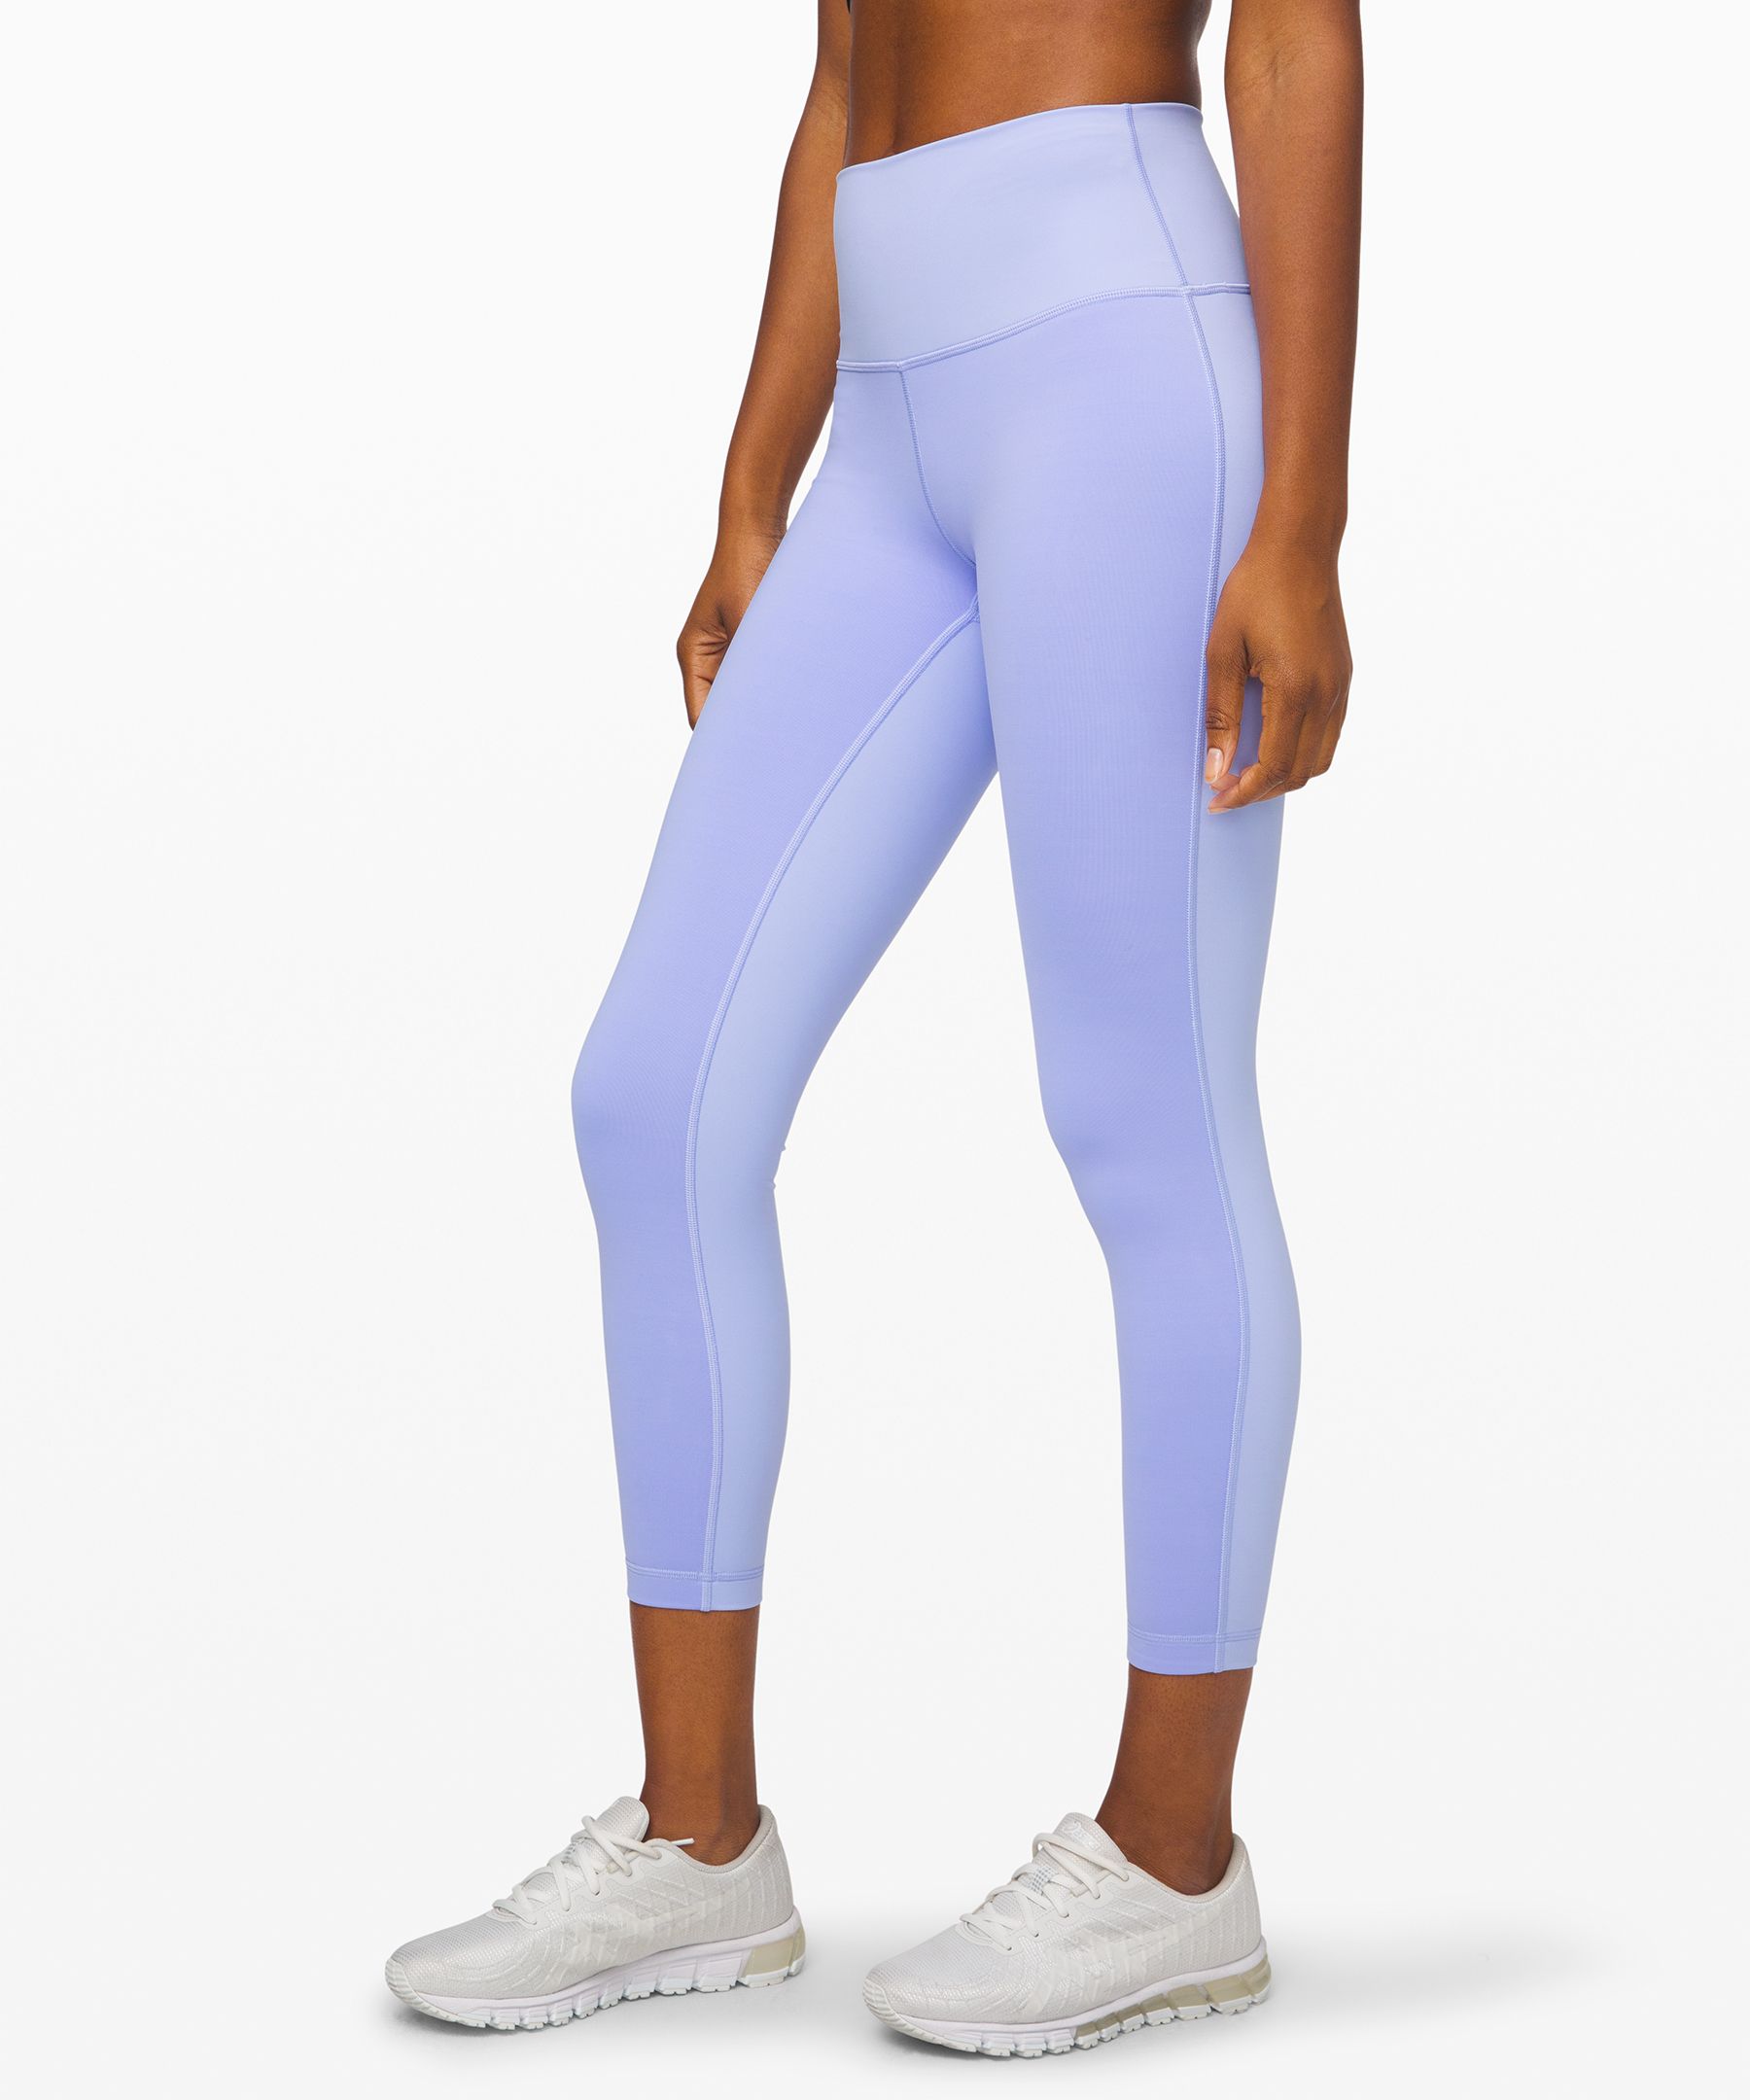 Lululemon Wunder Under Hi-Rise 7/8 Tight (25) - Wee Are From